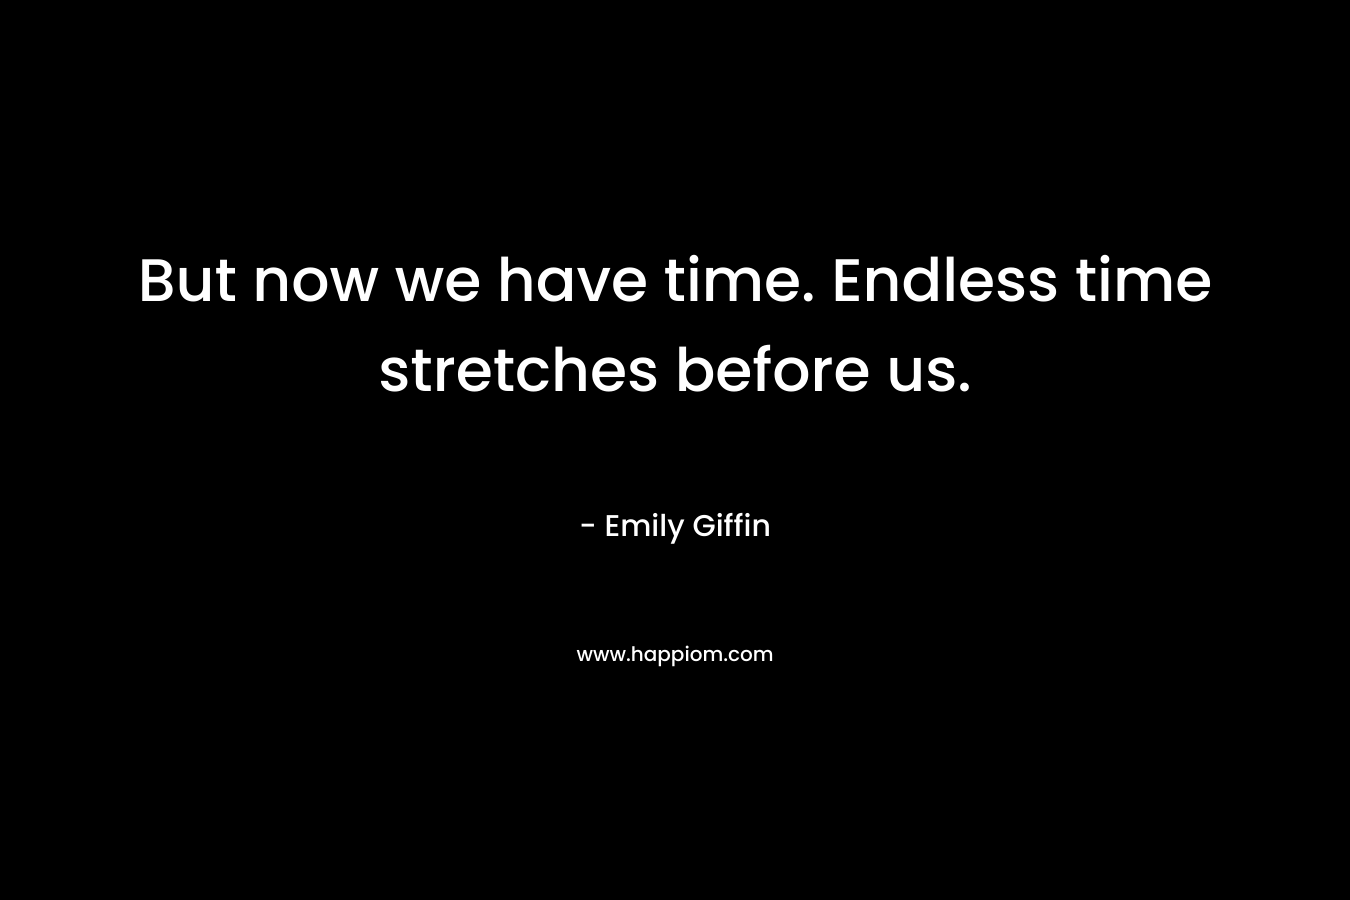 But now we have time. Endless time stretches before us.